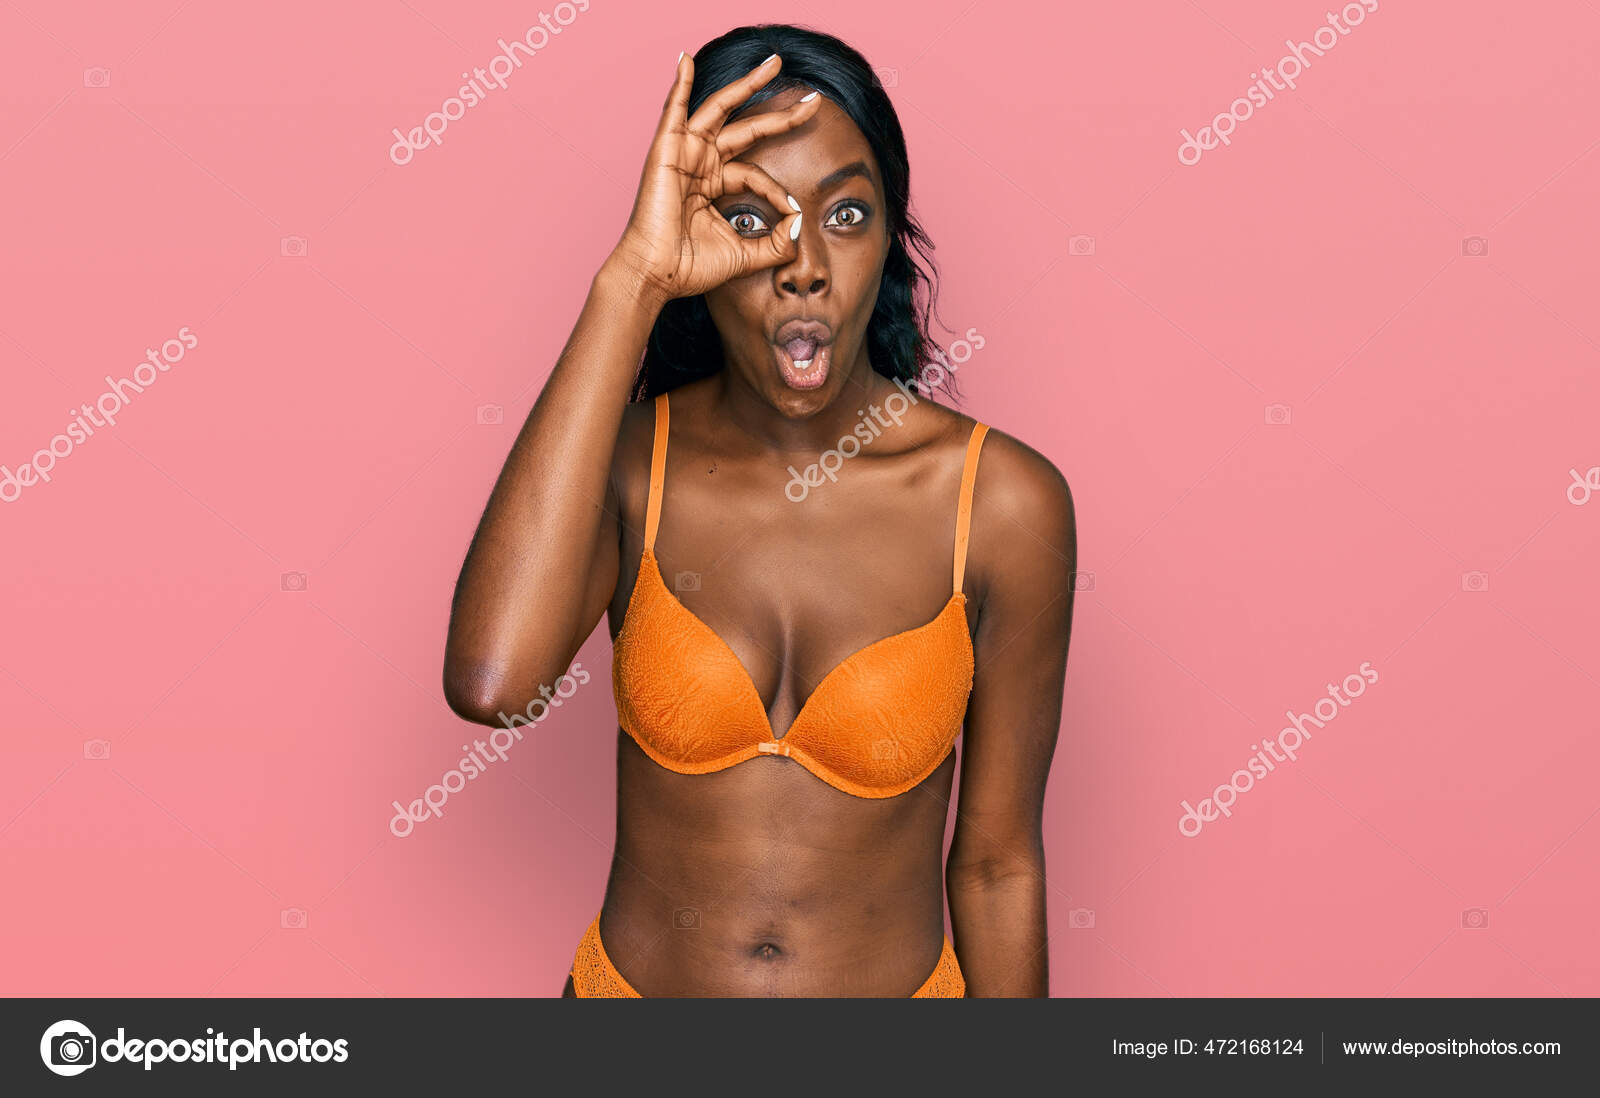 Laughing woman in bra and panties - Stock Photo - Dissolve